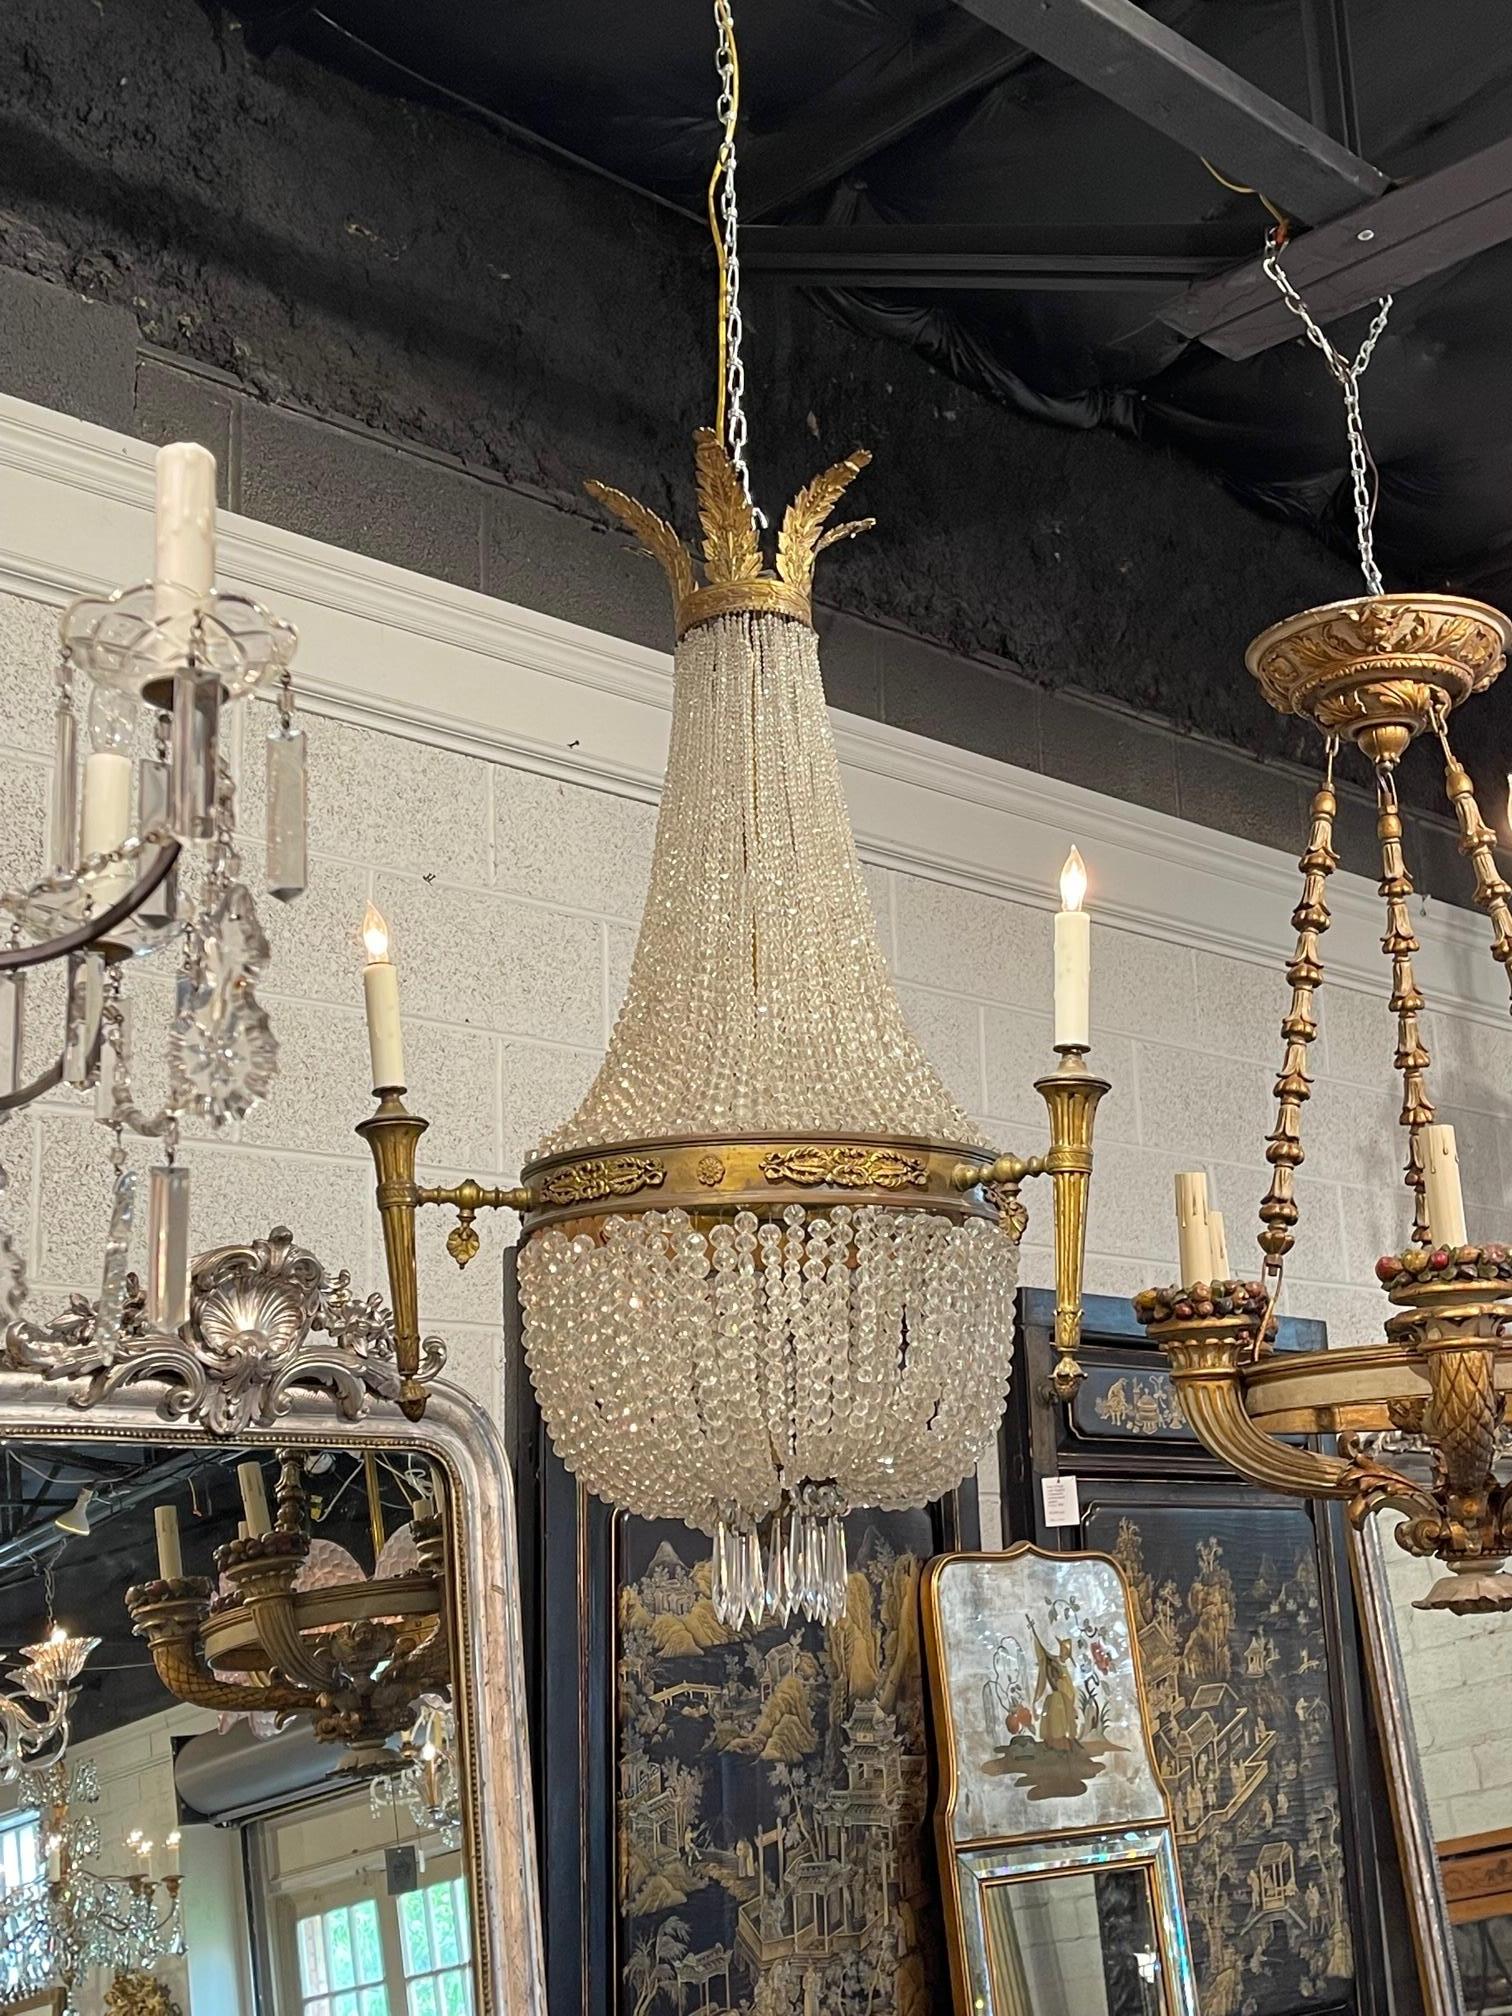 Exceptional 19th century French Louis XVI style bronze and crystal chandelier with 6 lights. This fixture has a beautiful basket shape and is loaded with crystals. Very fine bronze elements as well. Super elegant!